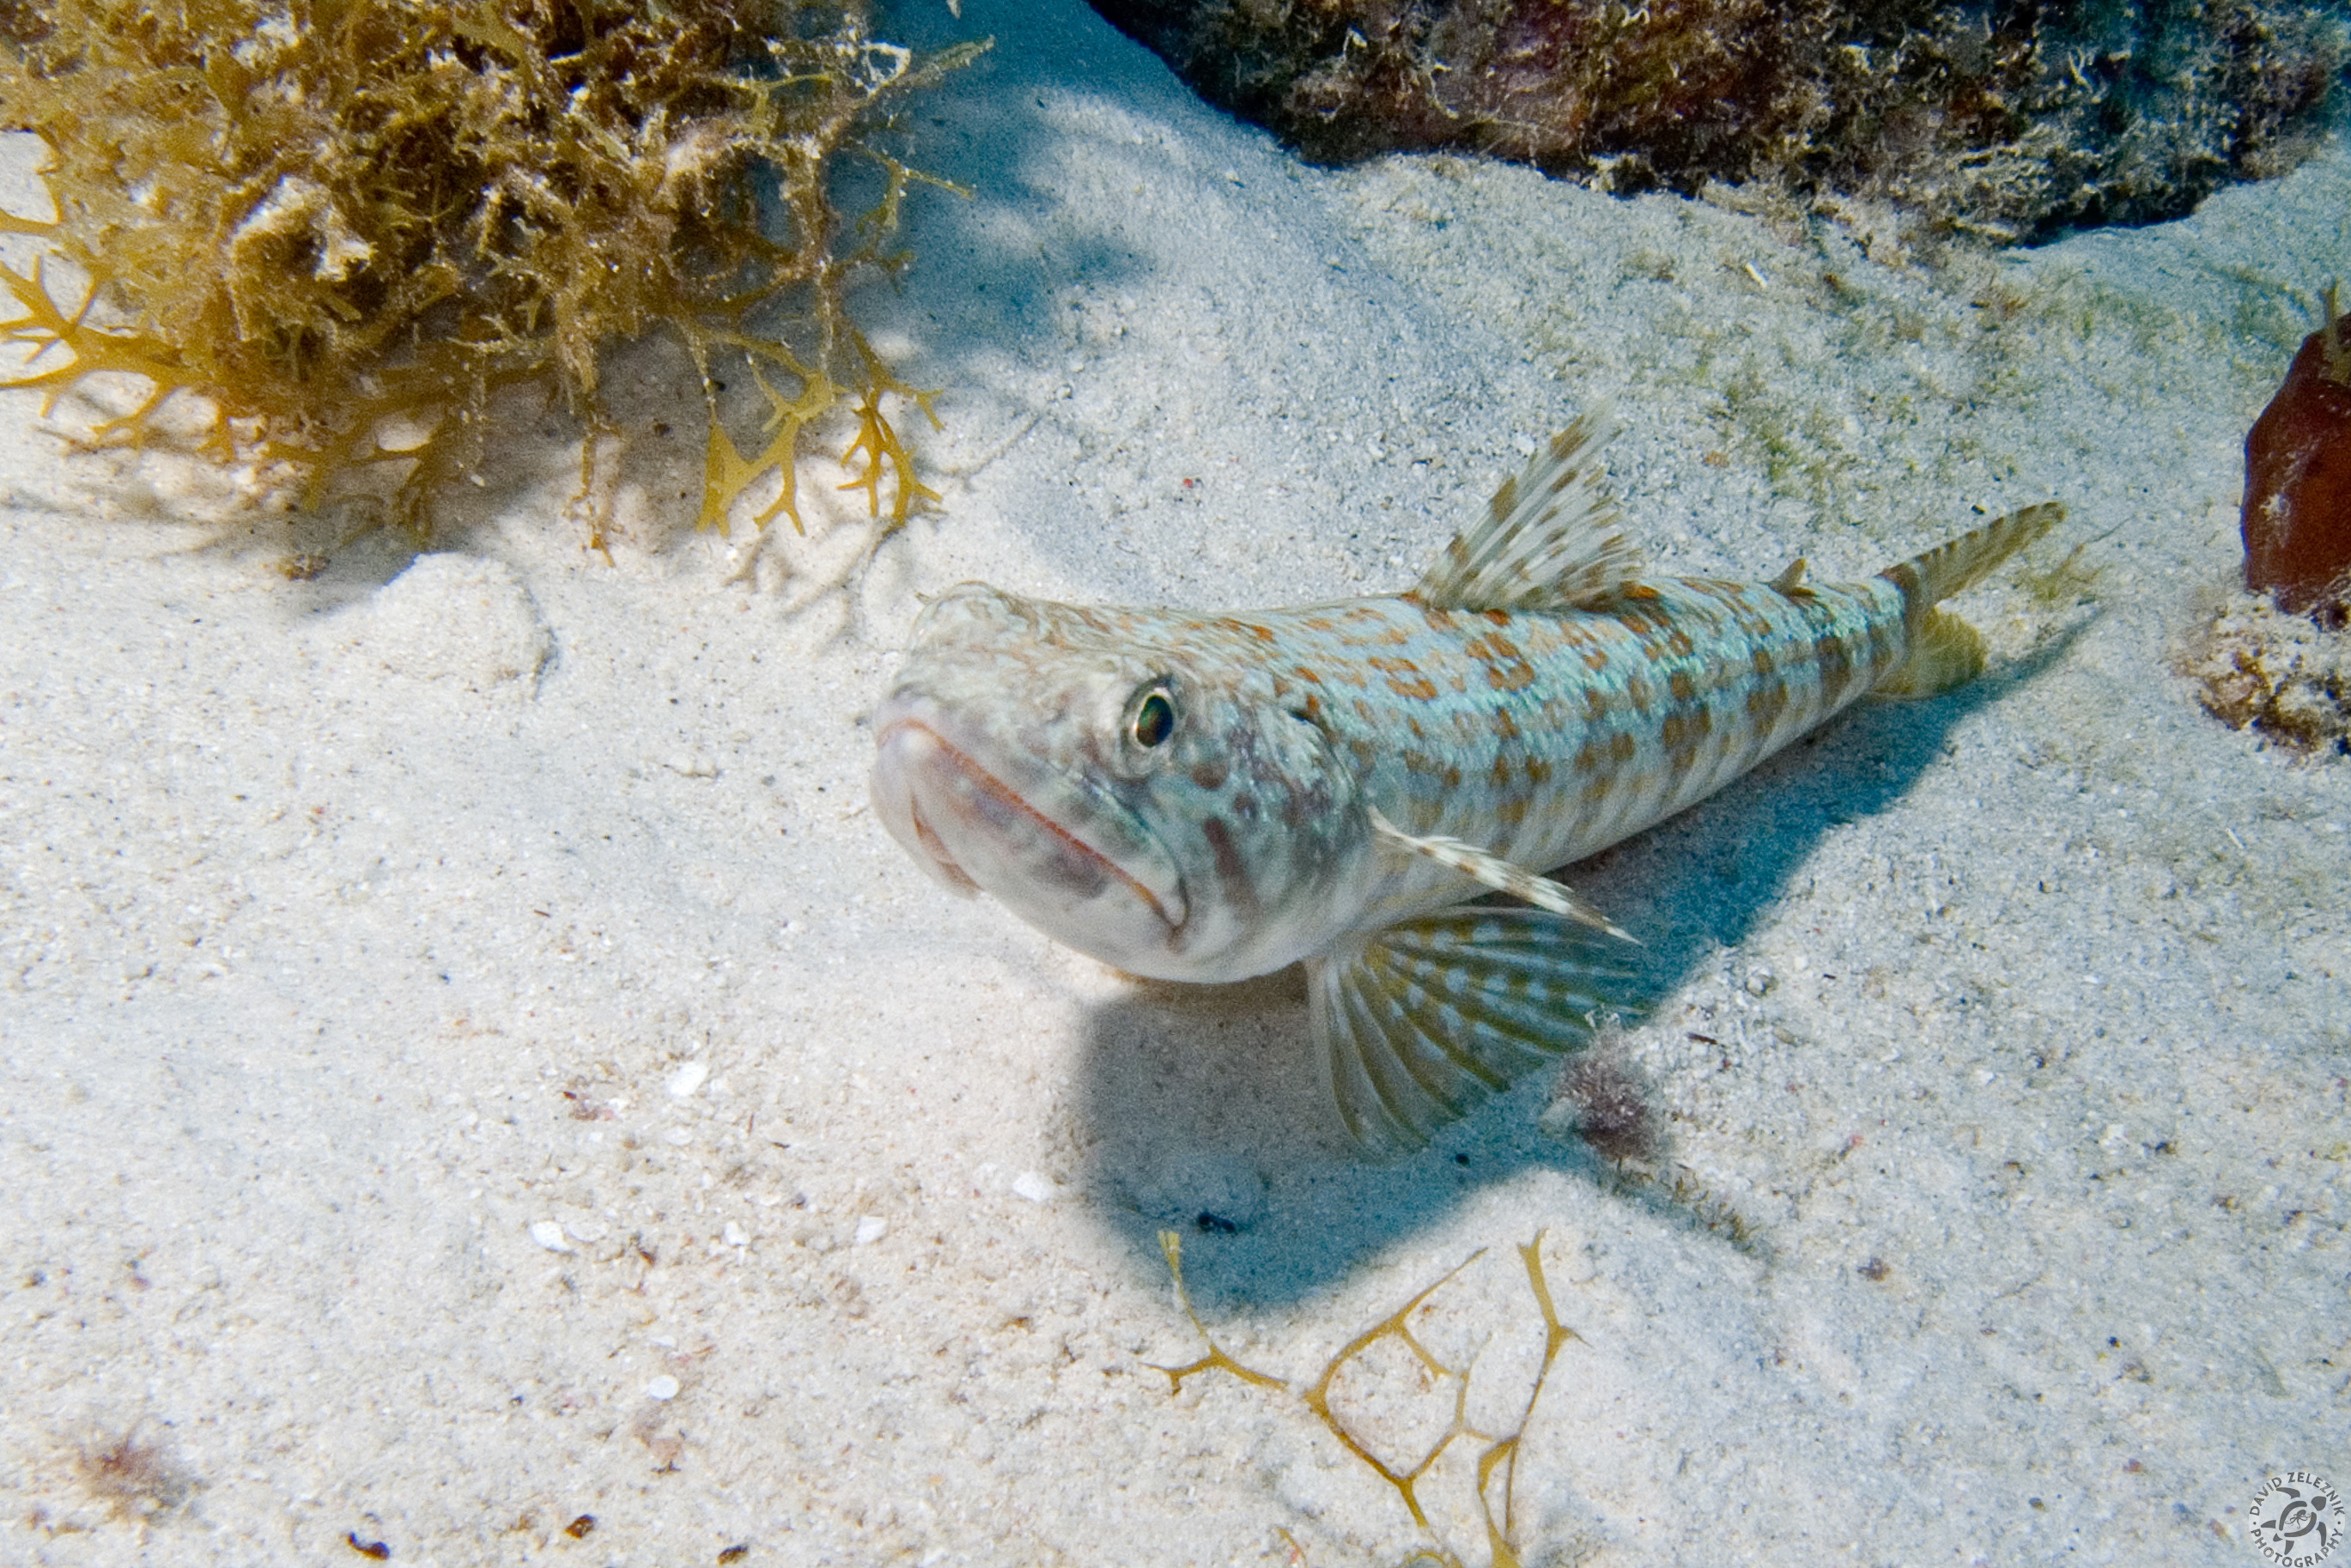 The Sand Diver usually likes to bury itself in the sand with only its head showing, but this one was content to rest and pose for the photo